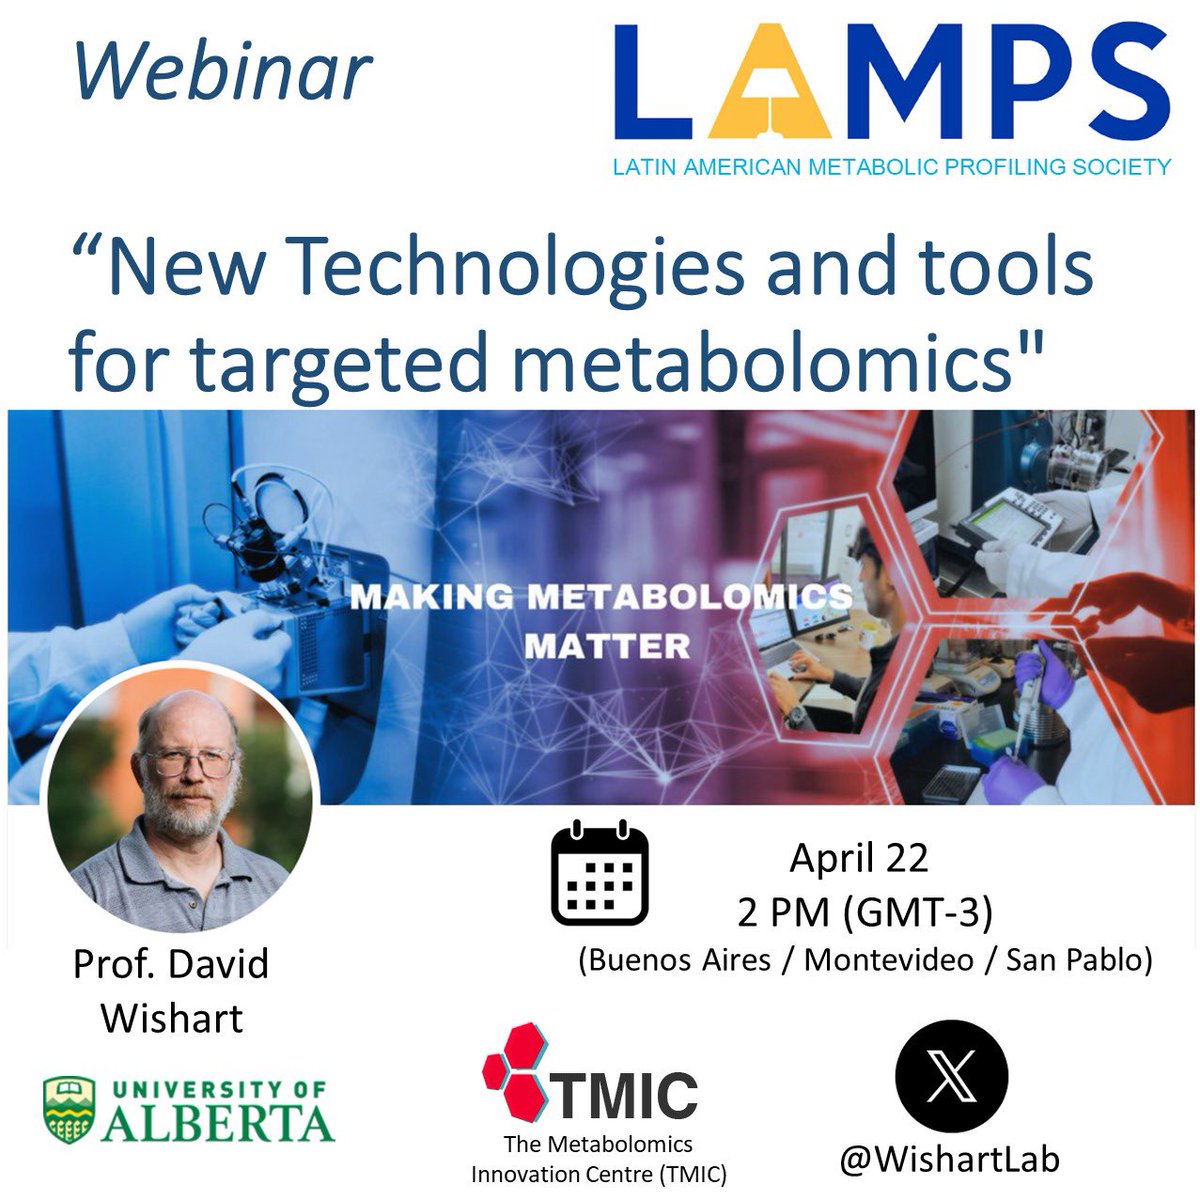 Our first webinar of the year couldn't be better... we are thrilled to announce Dr. David Wishart's talk about new technologies and tools for targeted metabolomics.

🗓️ April 22nd.
⏰ 2 p.m. (Arg/Uy/Bra) - 12 p.m. (Col/Pan/Ecu)
💻 Zoom